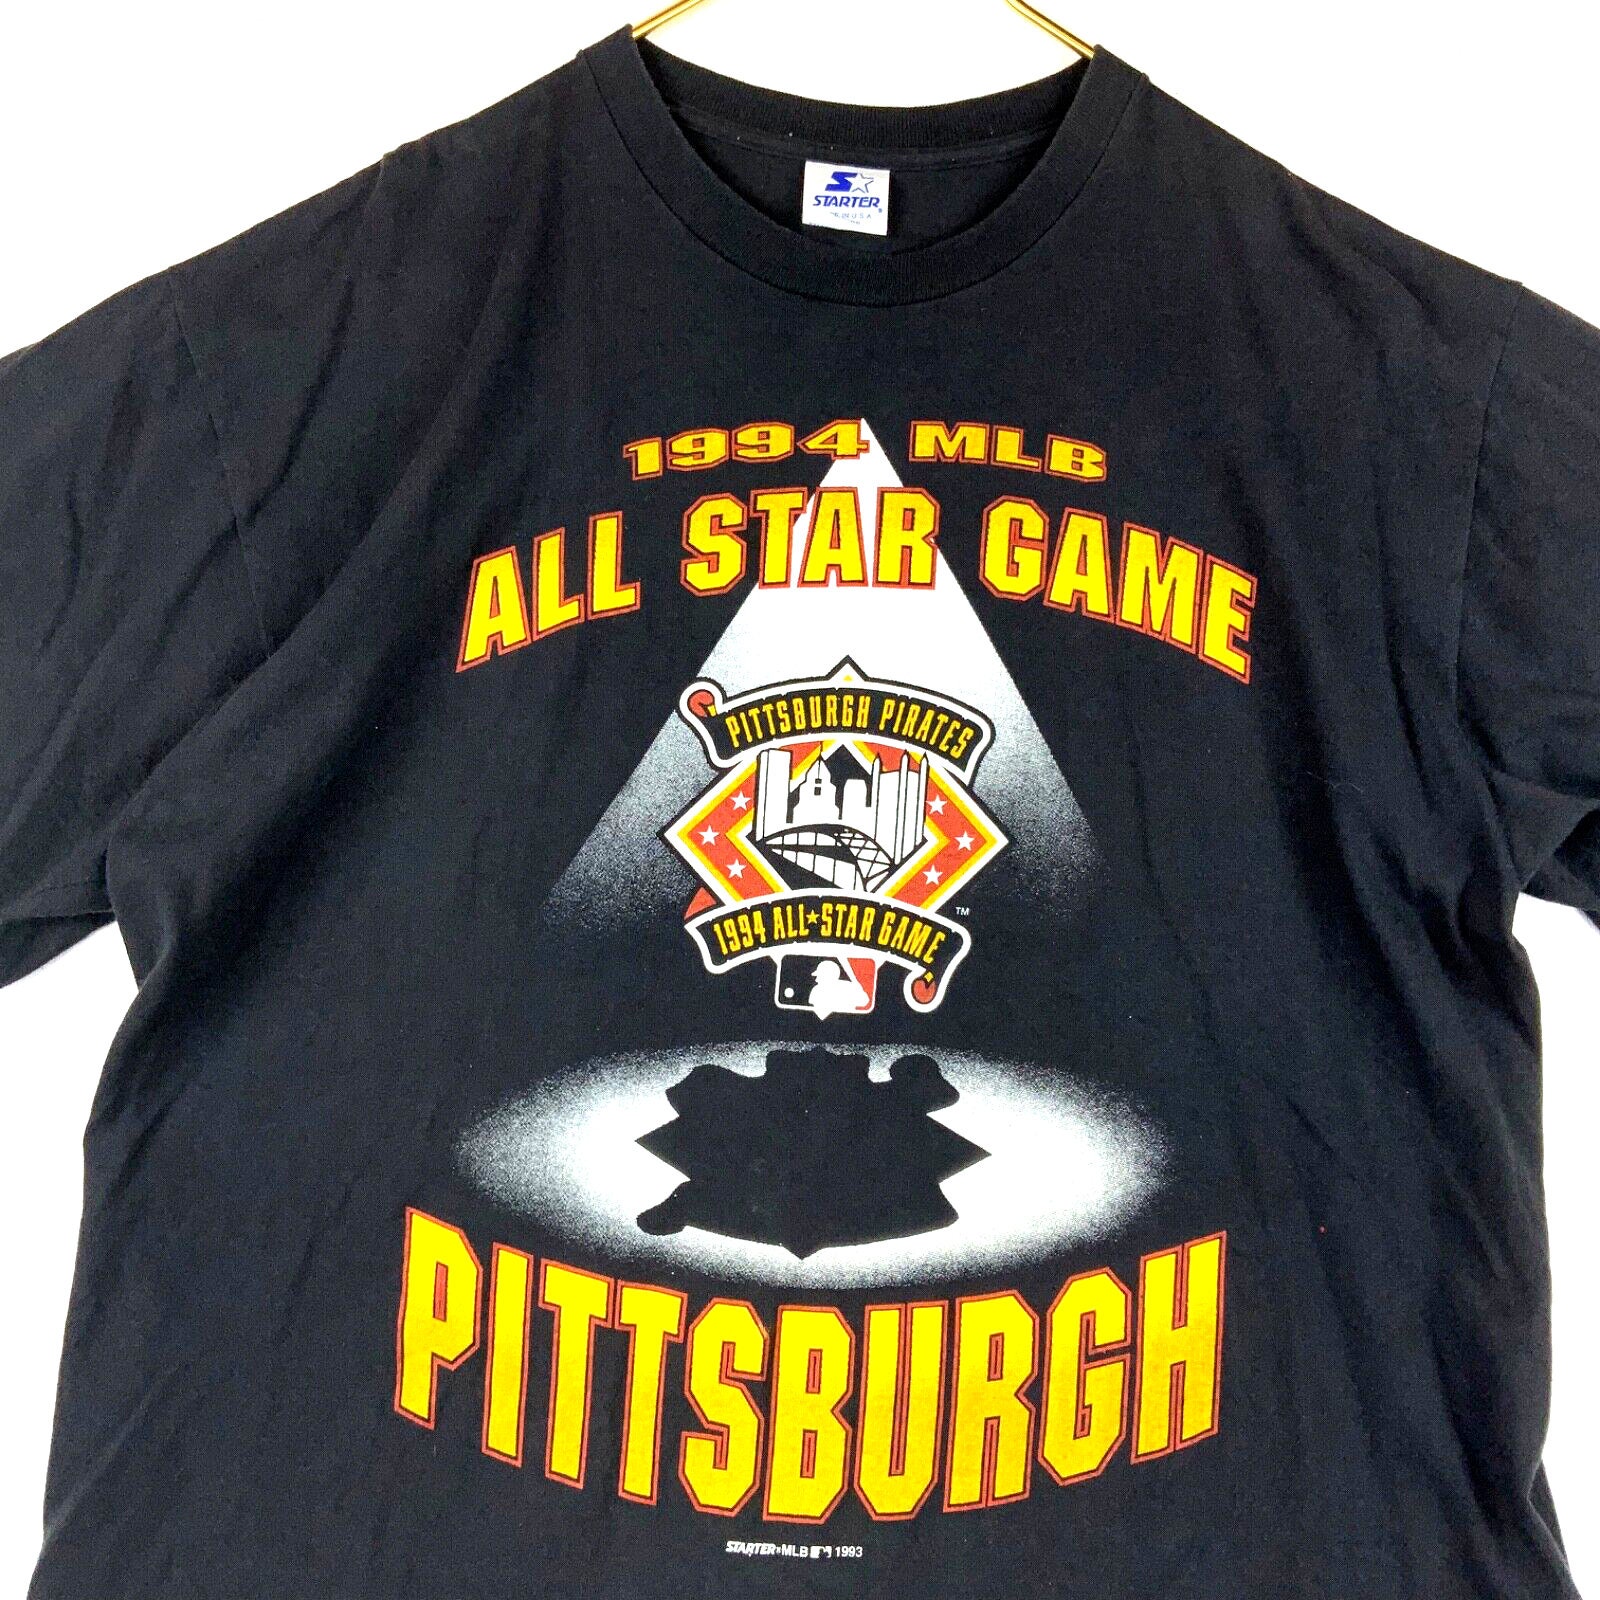 Pittsburgh Pirates All-Star Game MLB Jerseys for sale